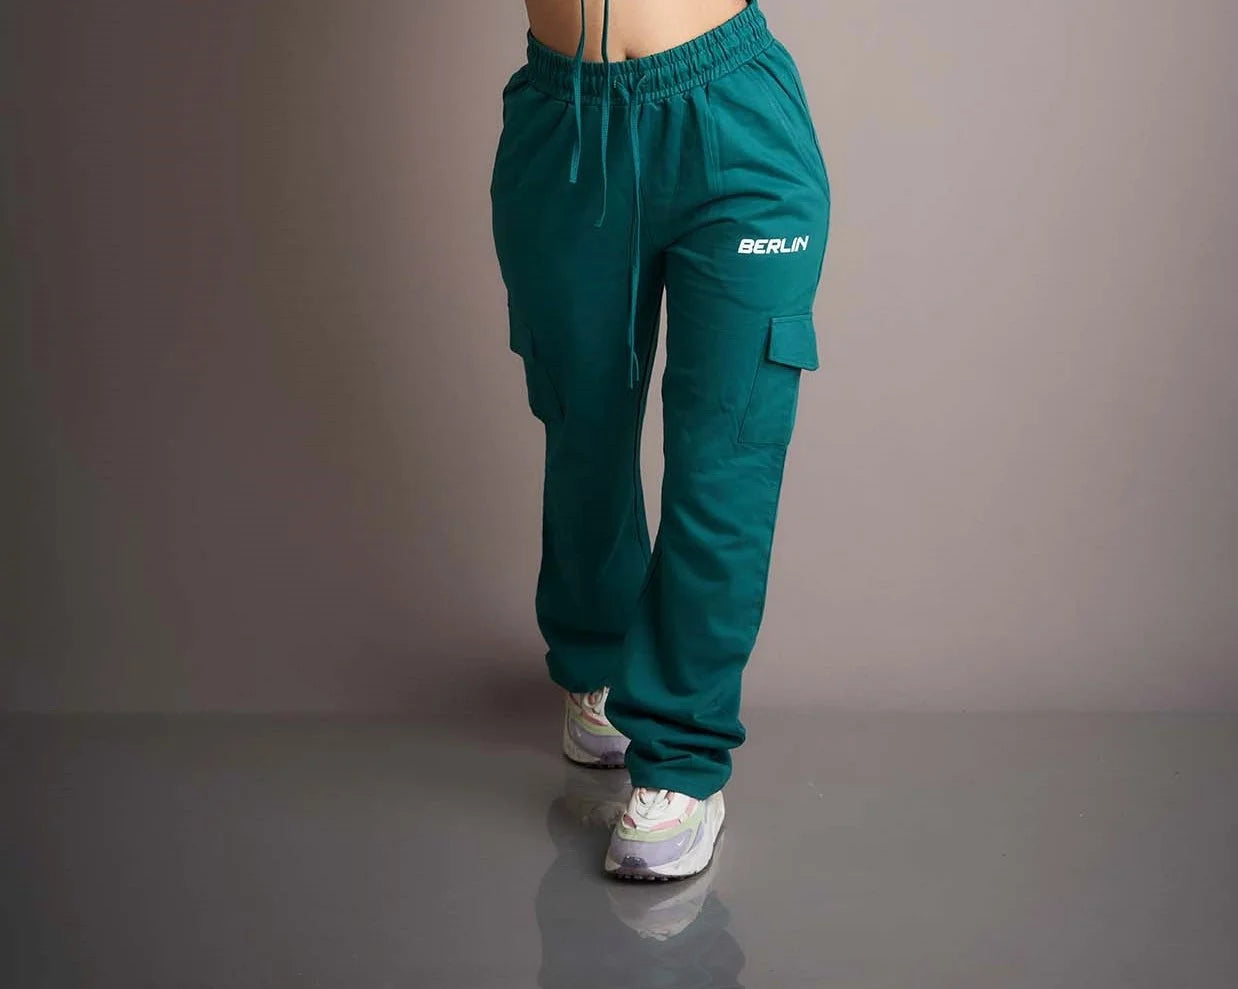  Stay cool and stylish in these green cargo pants, a trendy and comfortable choice for expressing your fashion sense.